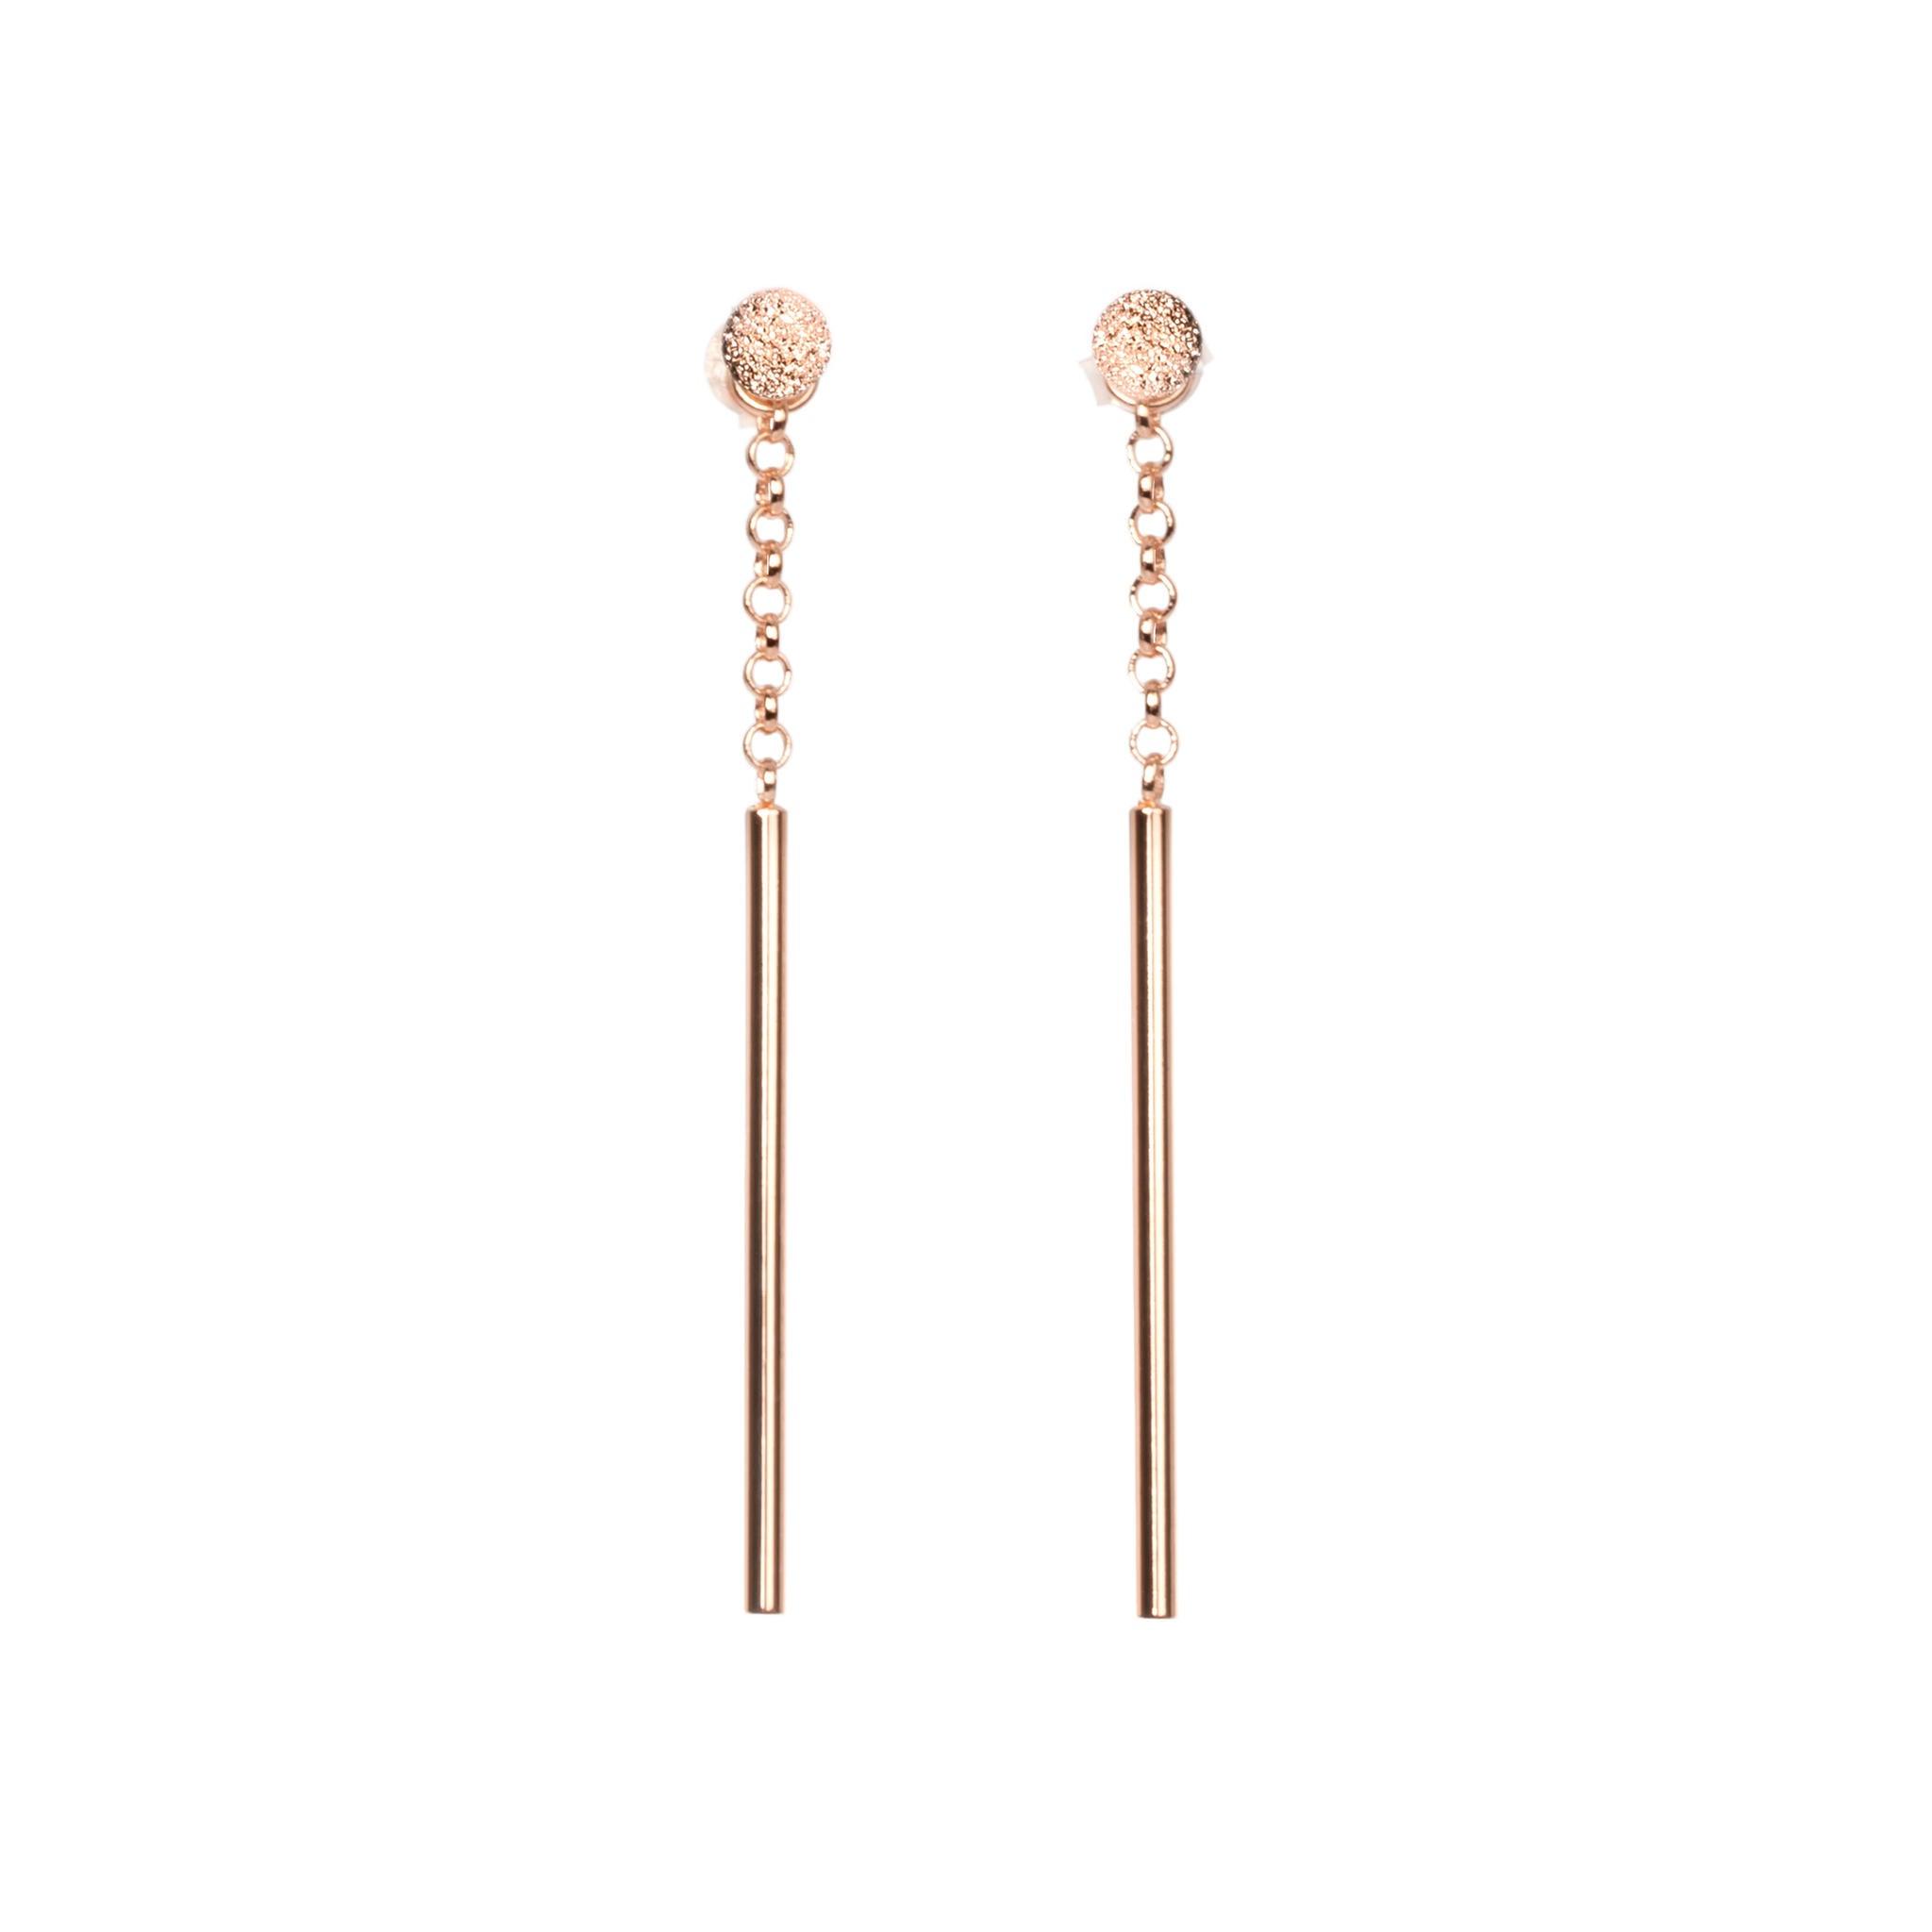 Stardust Falling Earrings - Rose Gold and Silver - RUUD Studios